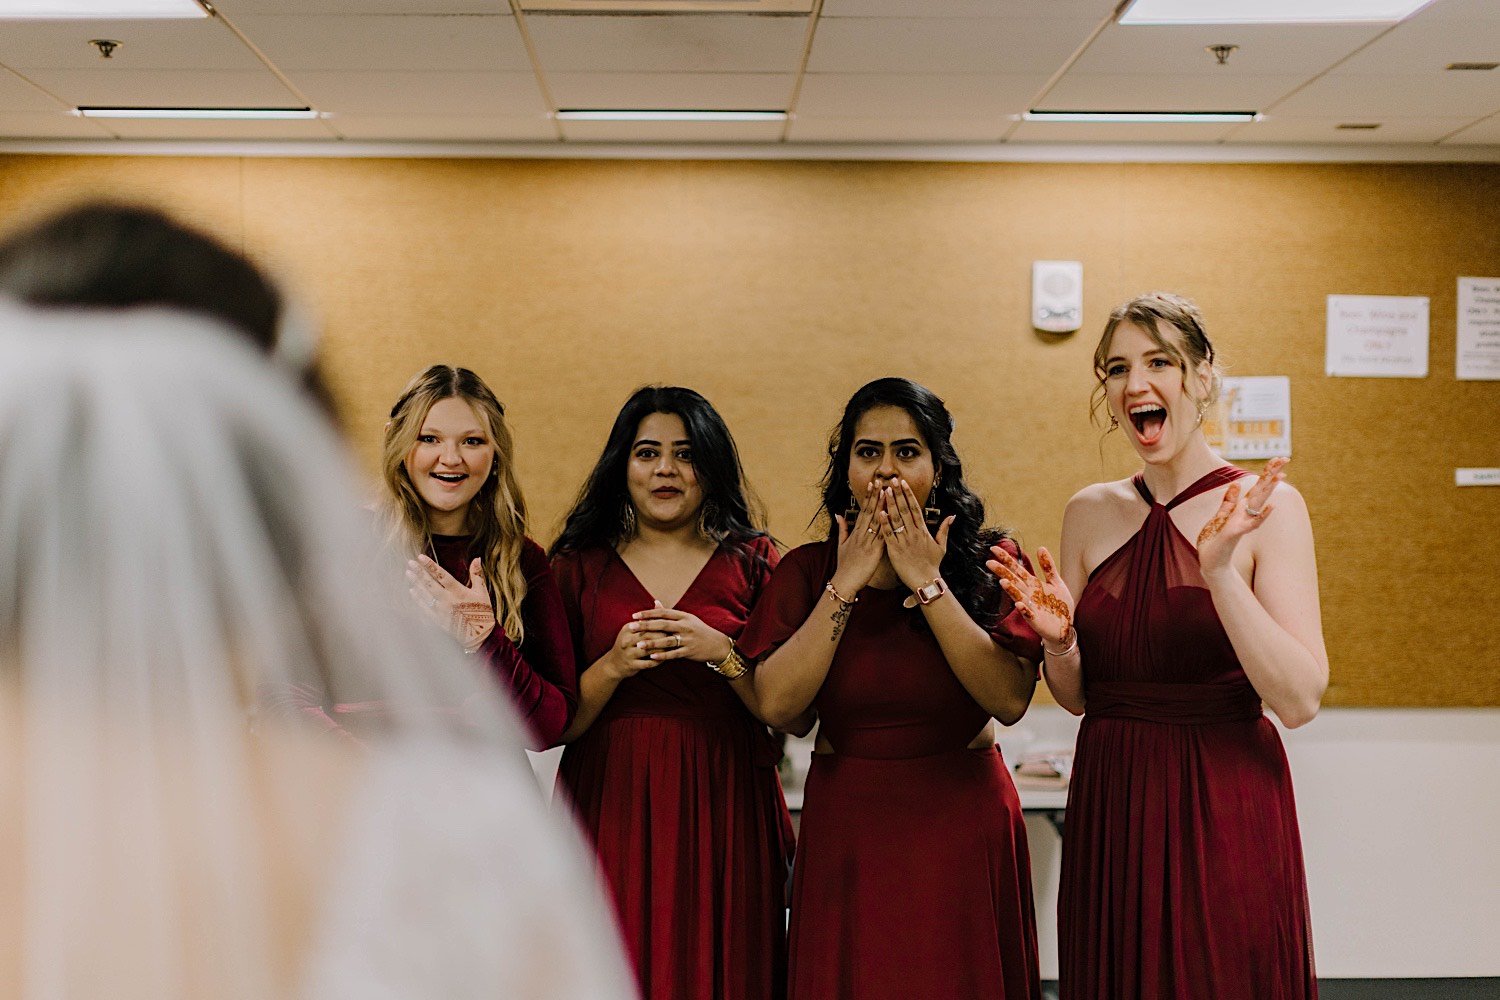 Bridal party reacting to seeing the bride's dress for the first time